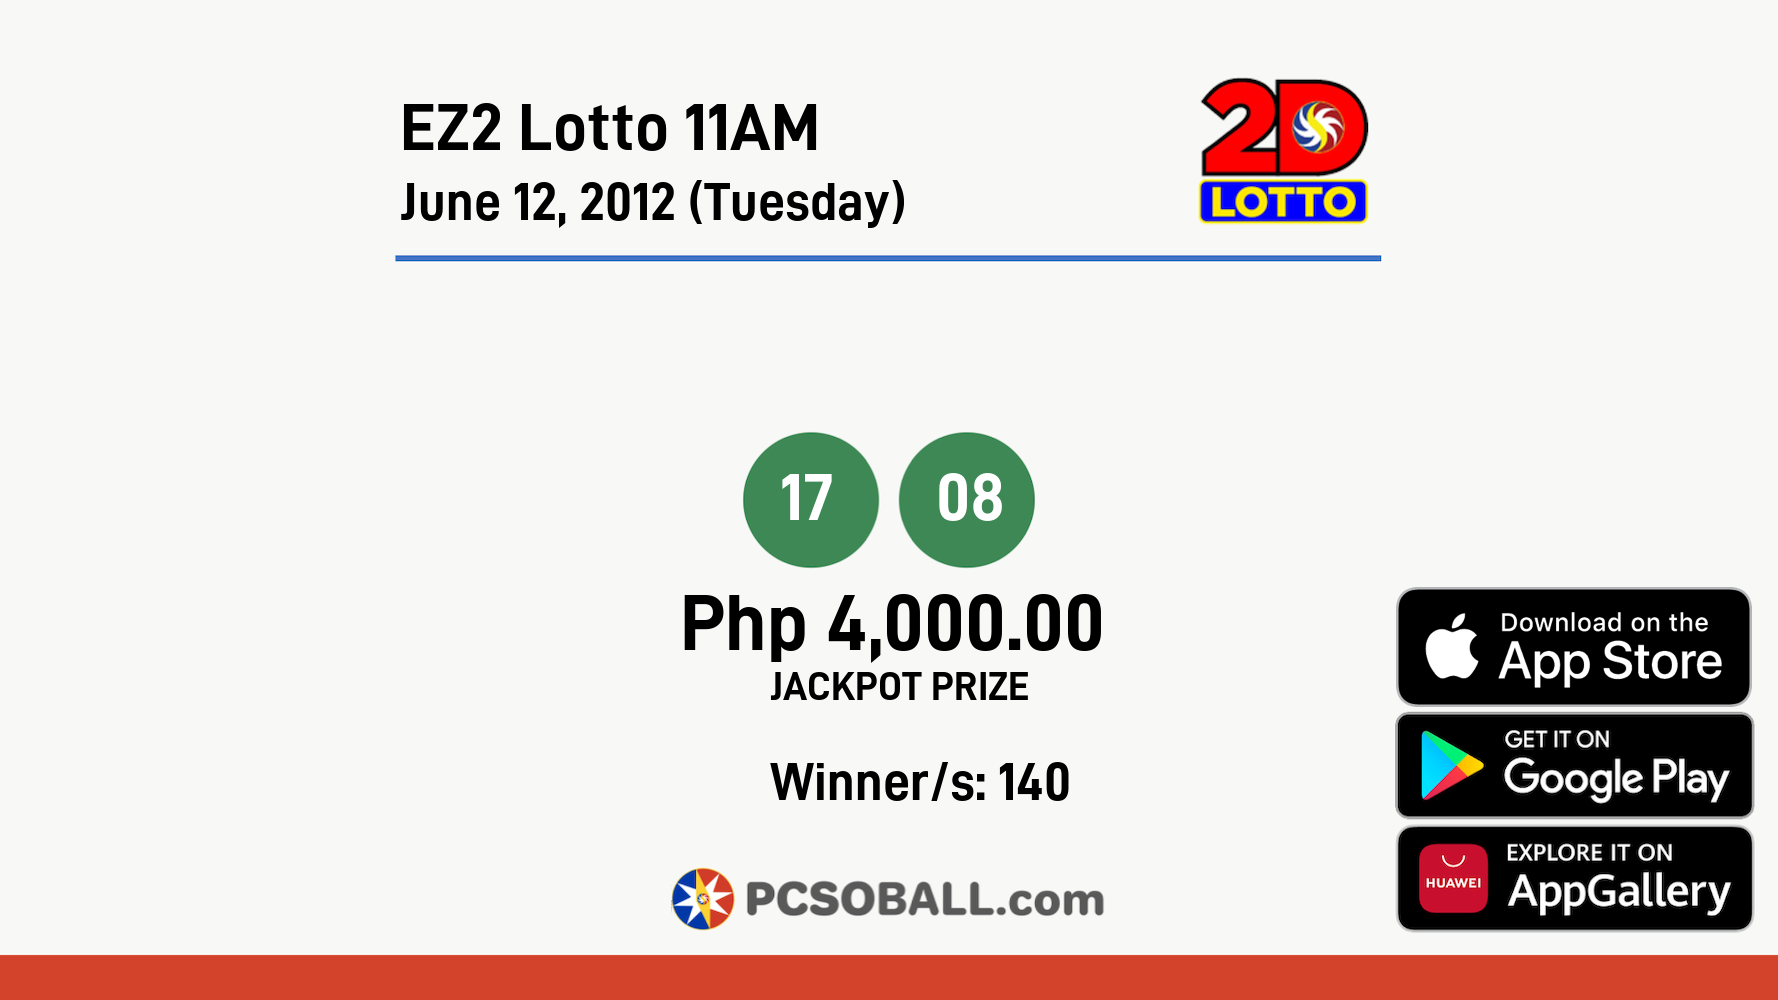 EZ2 Lotto 11AM June 12, 2012 (Tuesday) Result